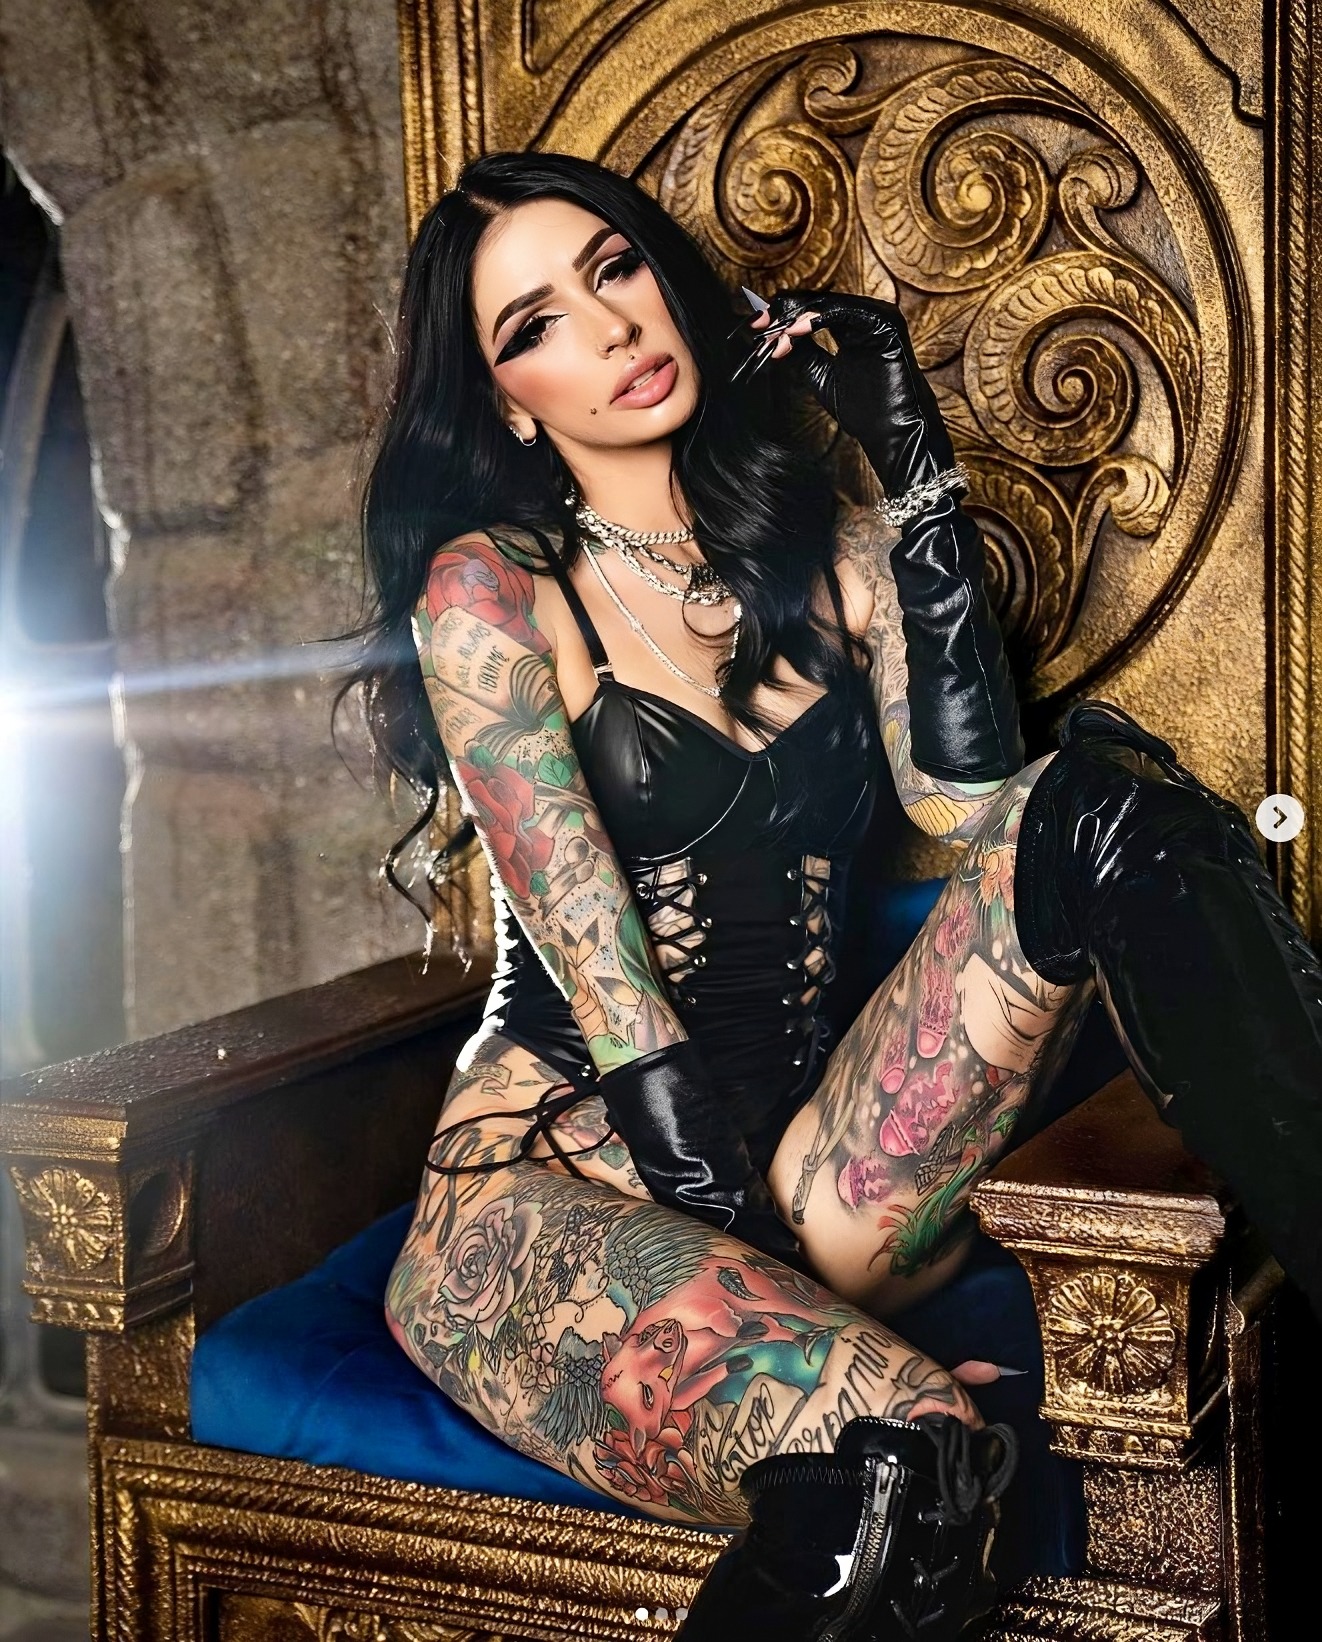 thanhdaica the mysterious world of madison skye uncover the secrets of delicately glamorous tattoos that s beloved by millions of fans video 64d3c6ef6c69f The Mysterious World Of Madison Skye: Uncover The Secrets Of Delicately Glamorous Tattoos That's Beloved By Millions Of Fans 2023 (Video)